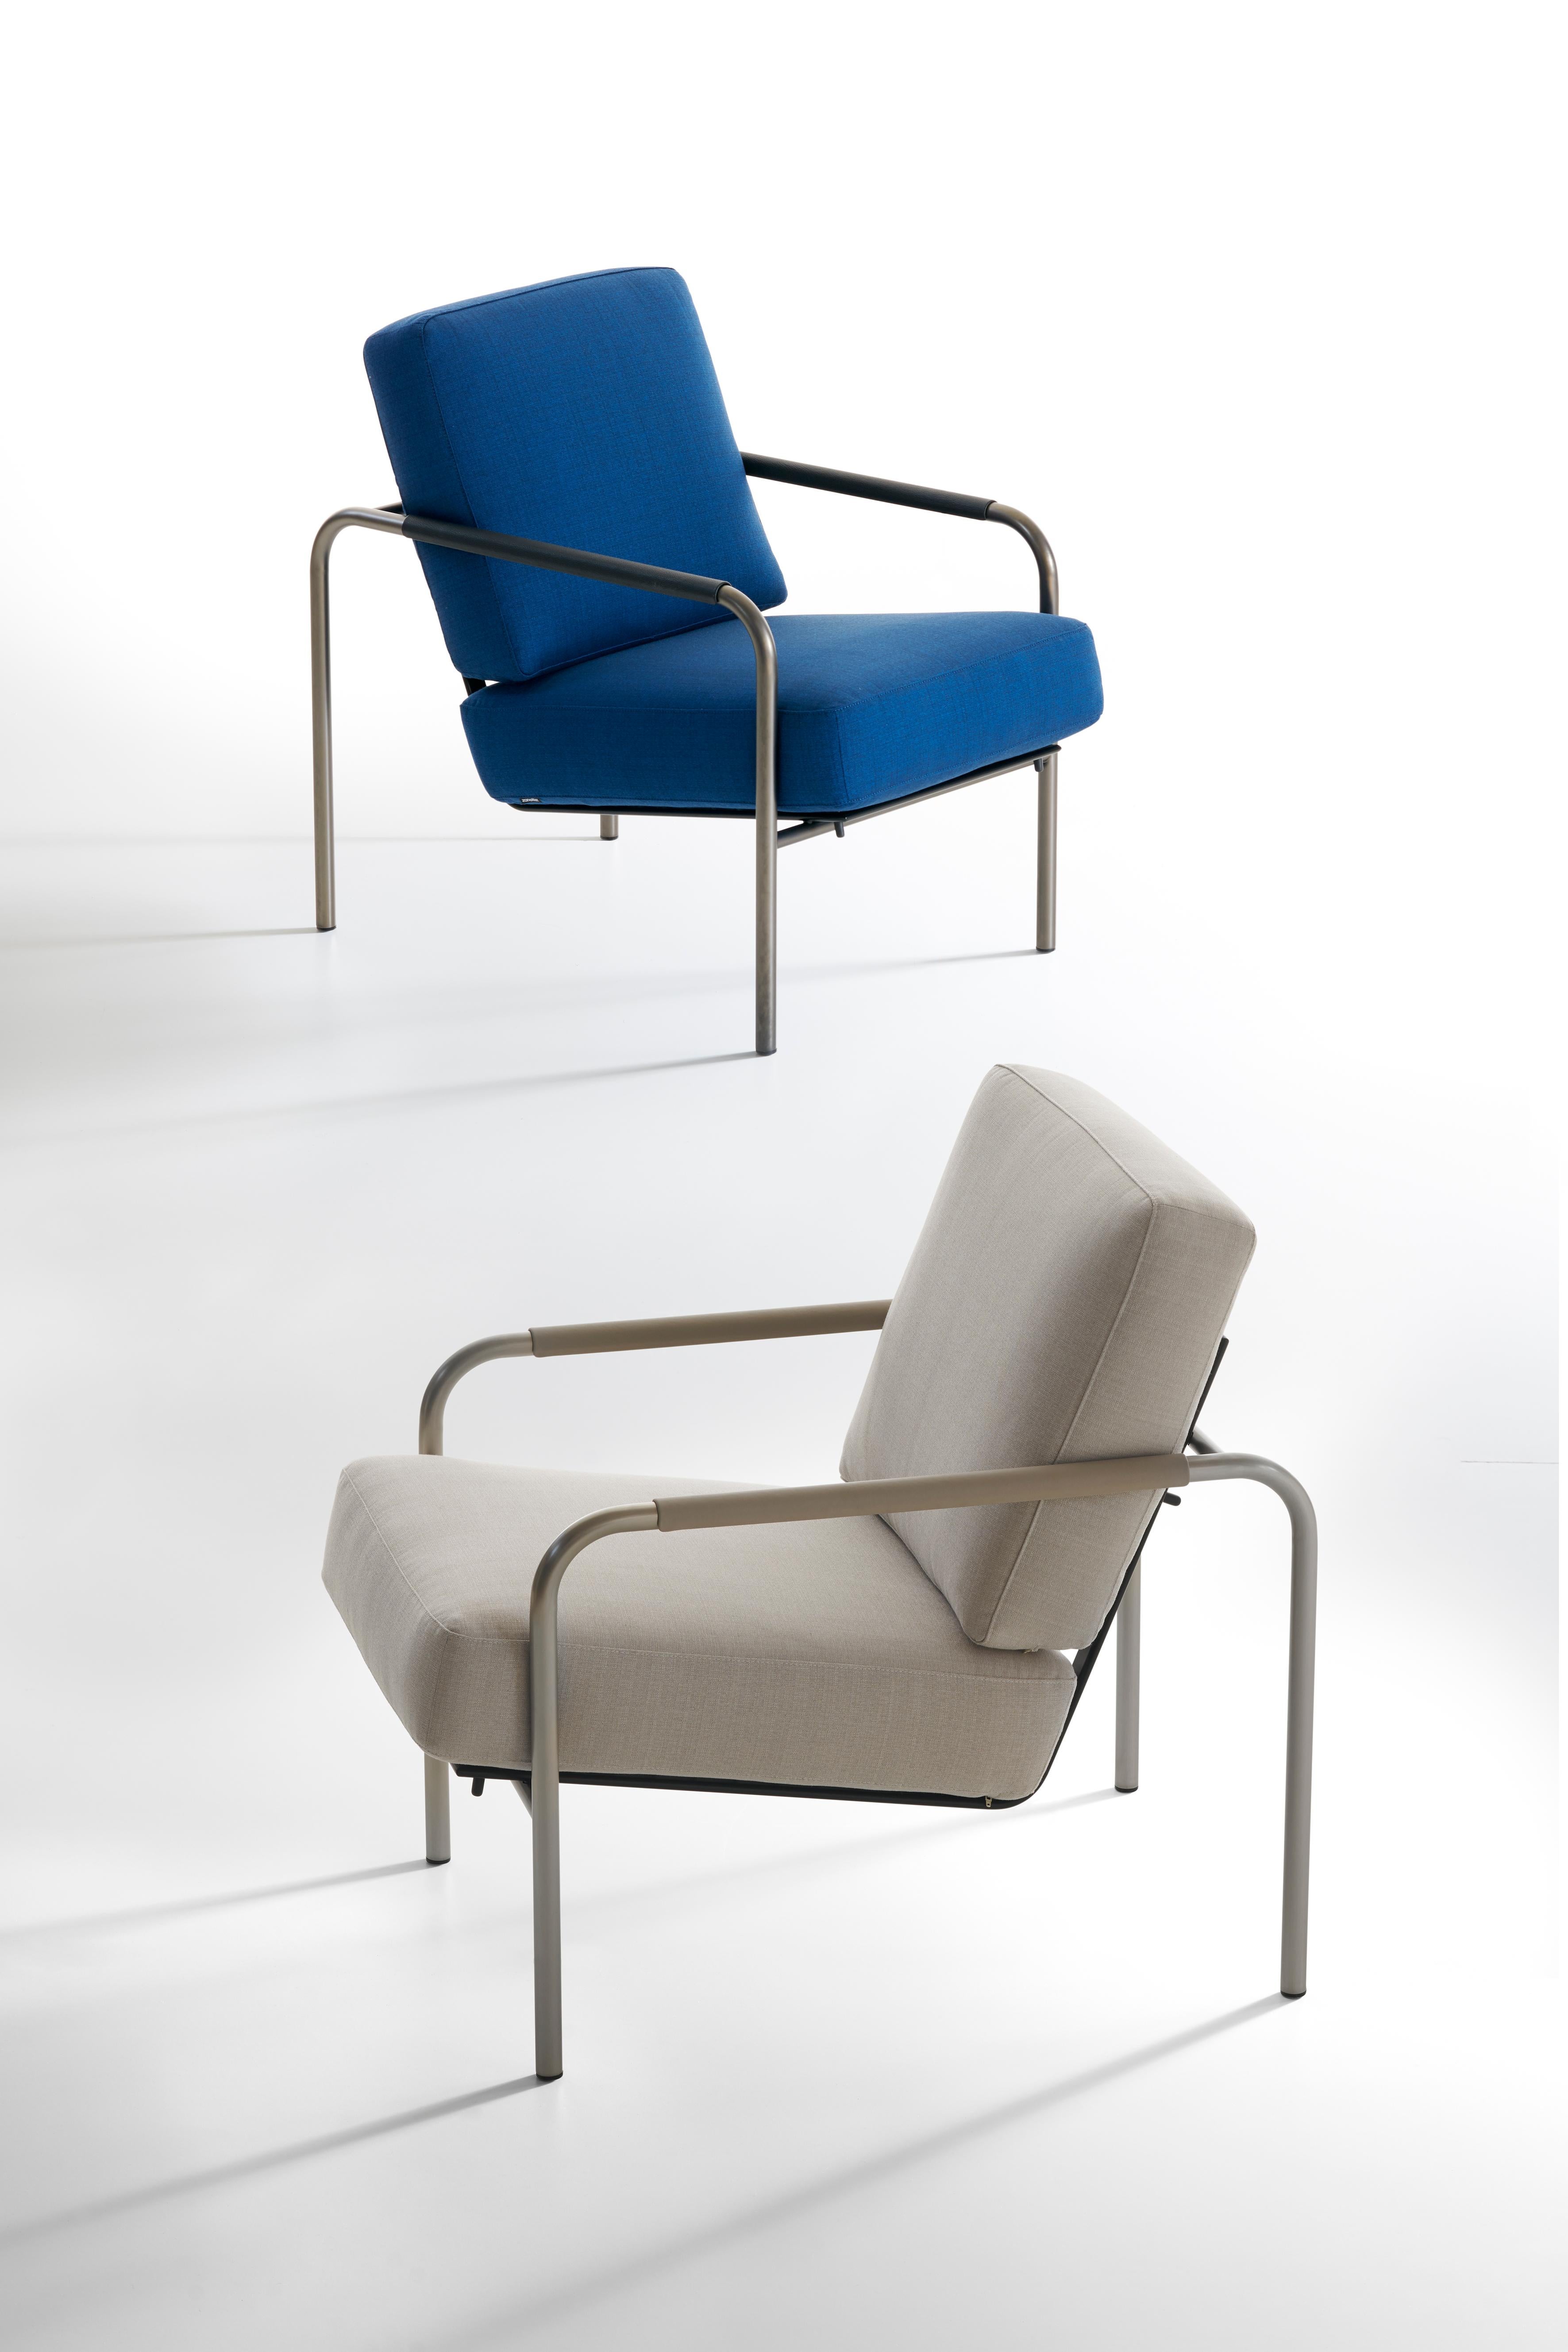 Zanotta Susanna Armchair in Vale 24803 Fabric & Nickel-Satin Finished Frame

Frame in chromium-plated, or in natural or black nickel- satin finished, or black painted tubular steel. Adjustable two- position cushion support in black painted steel.